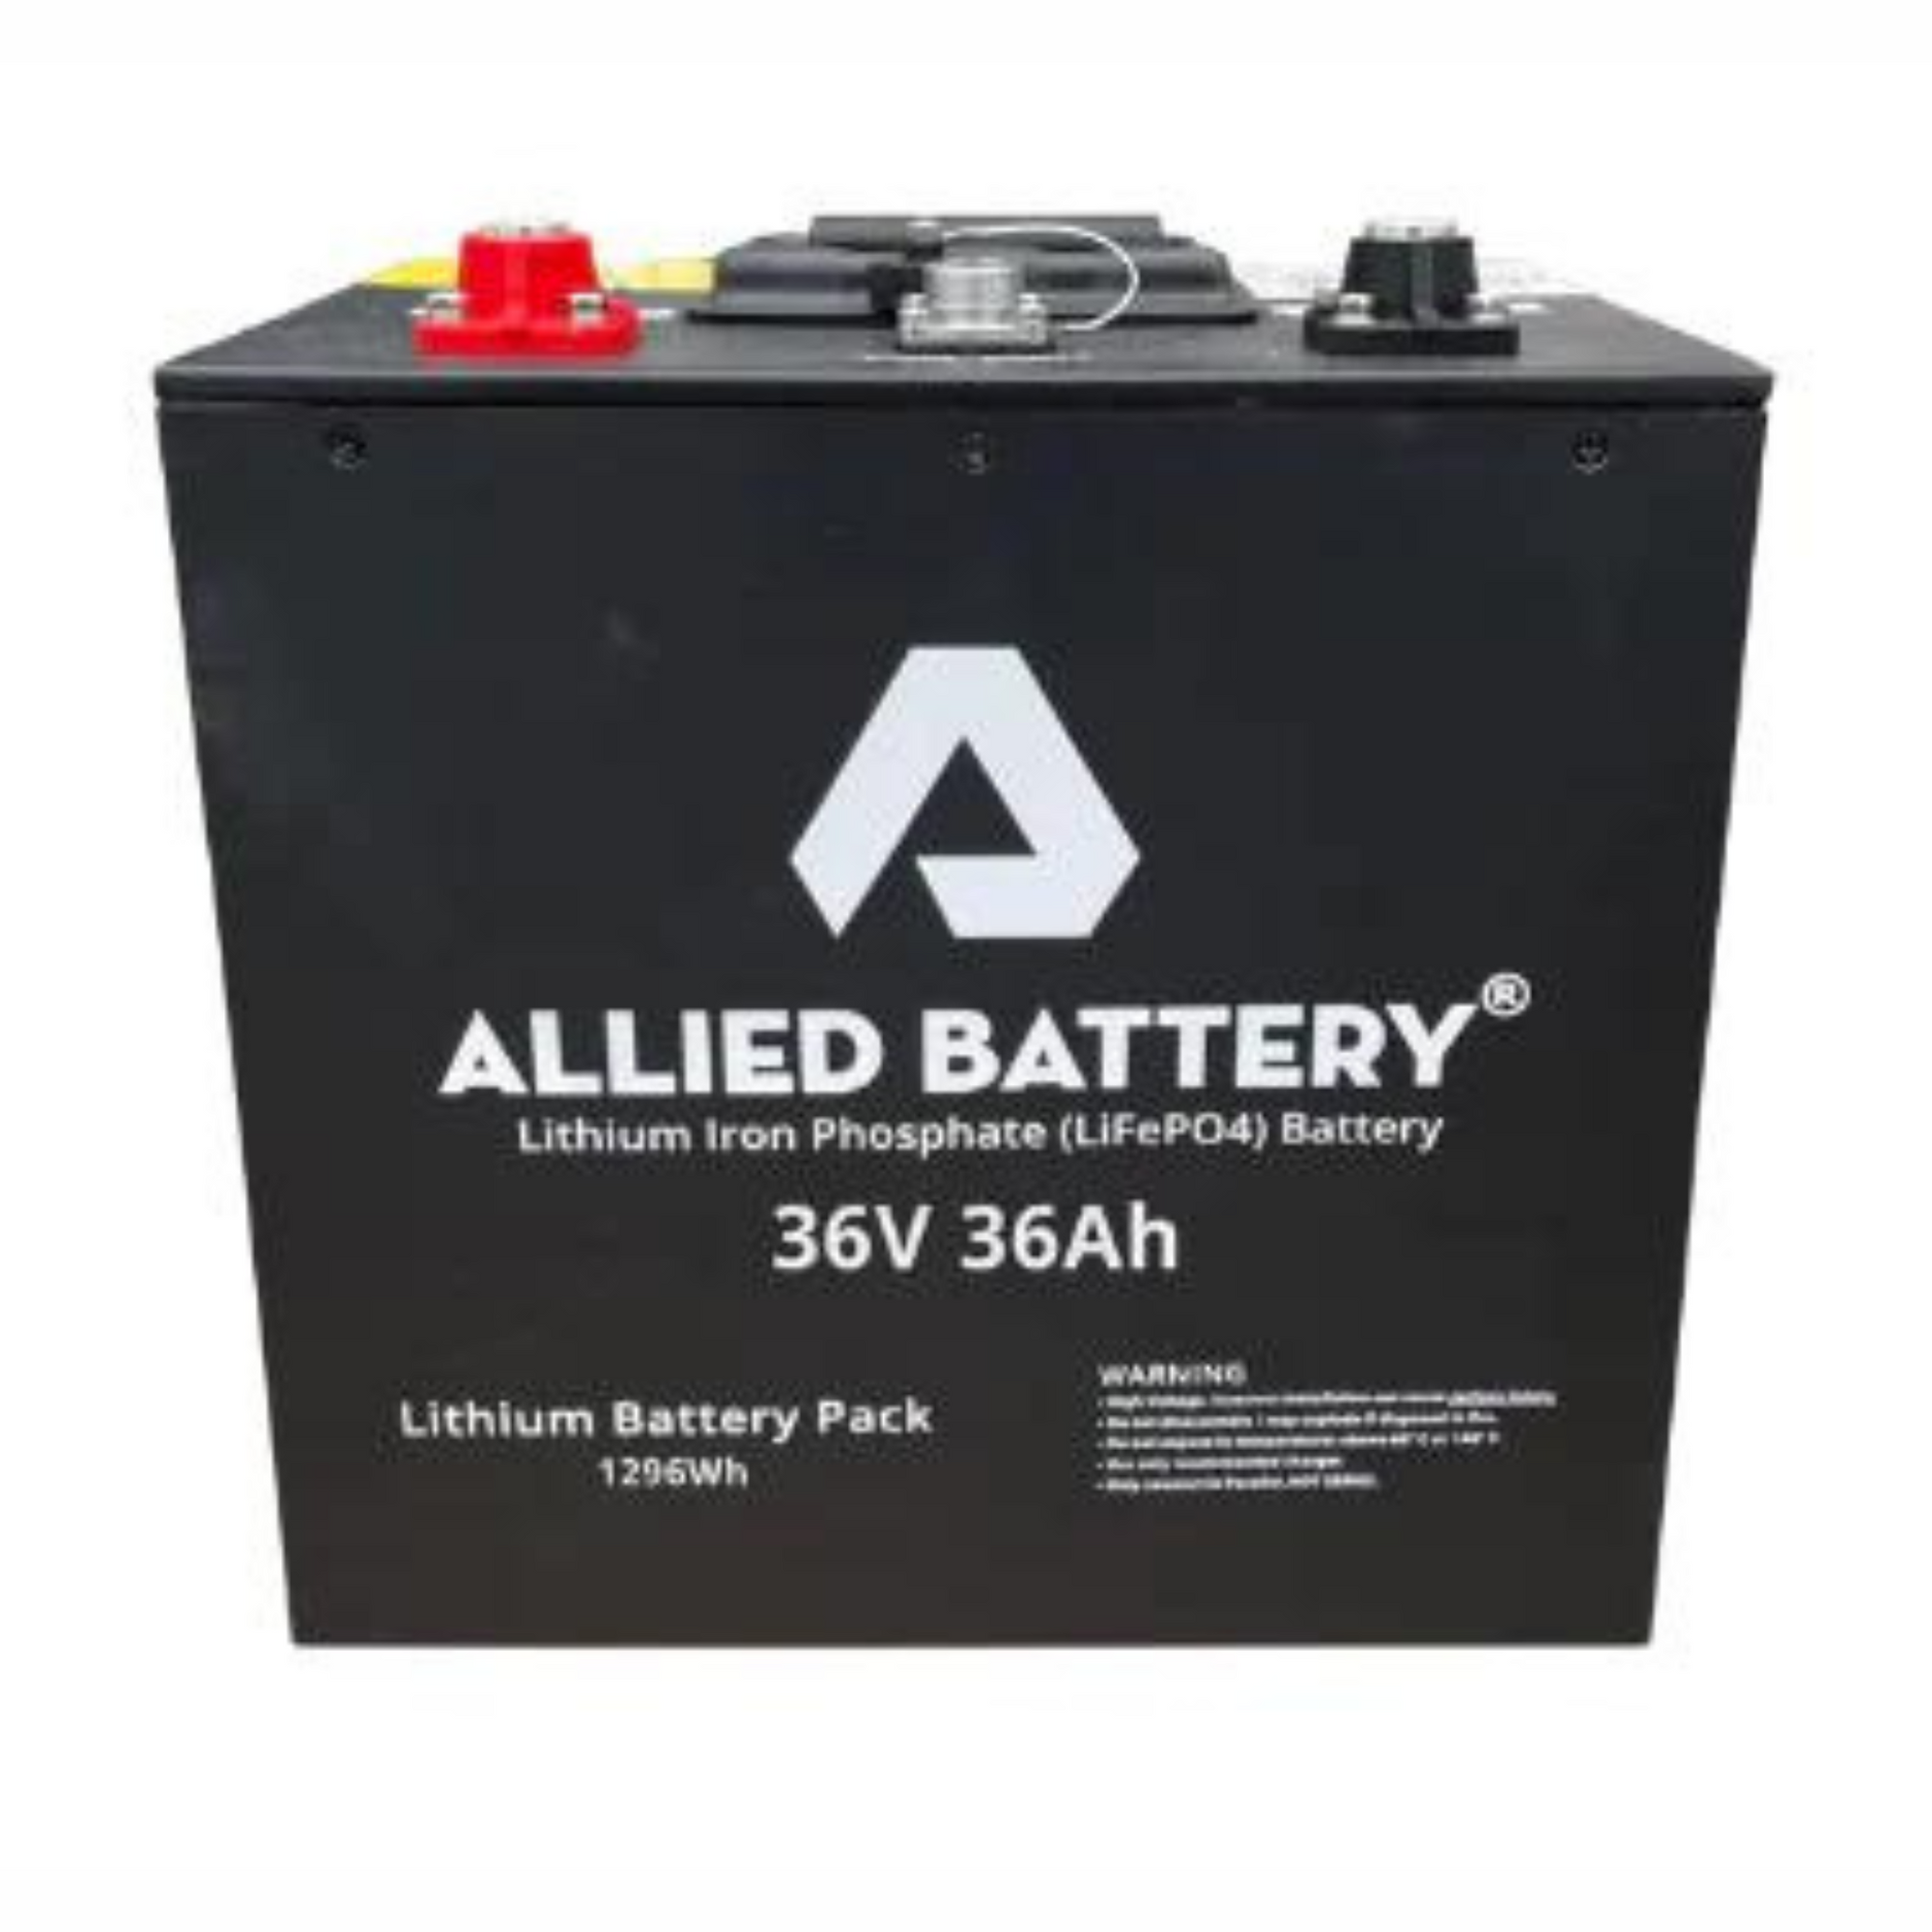 Allied Lithium 36V 36Ah "Drop-in Ready" Lithium Golf Cart Battery